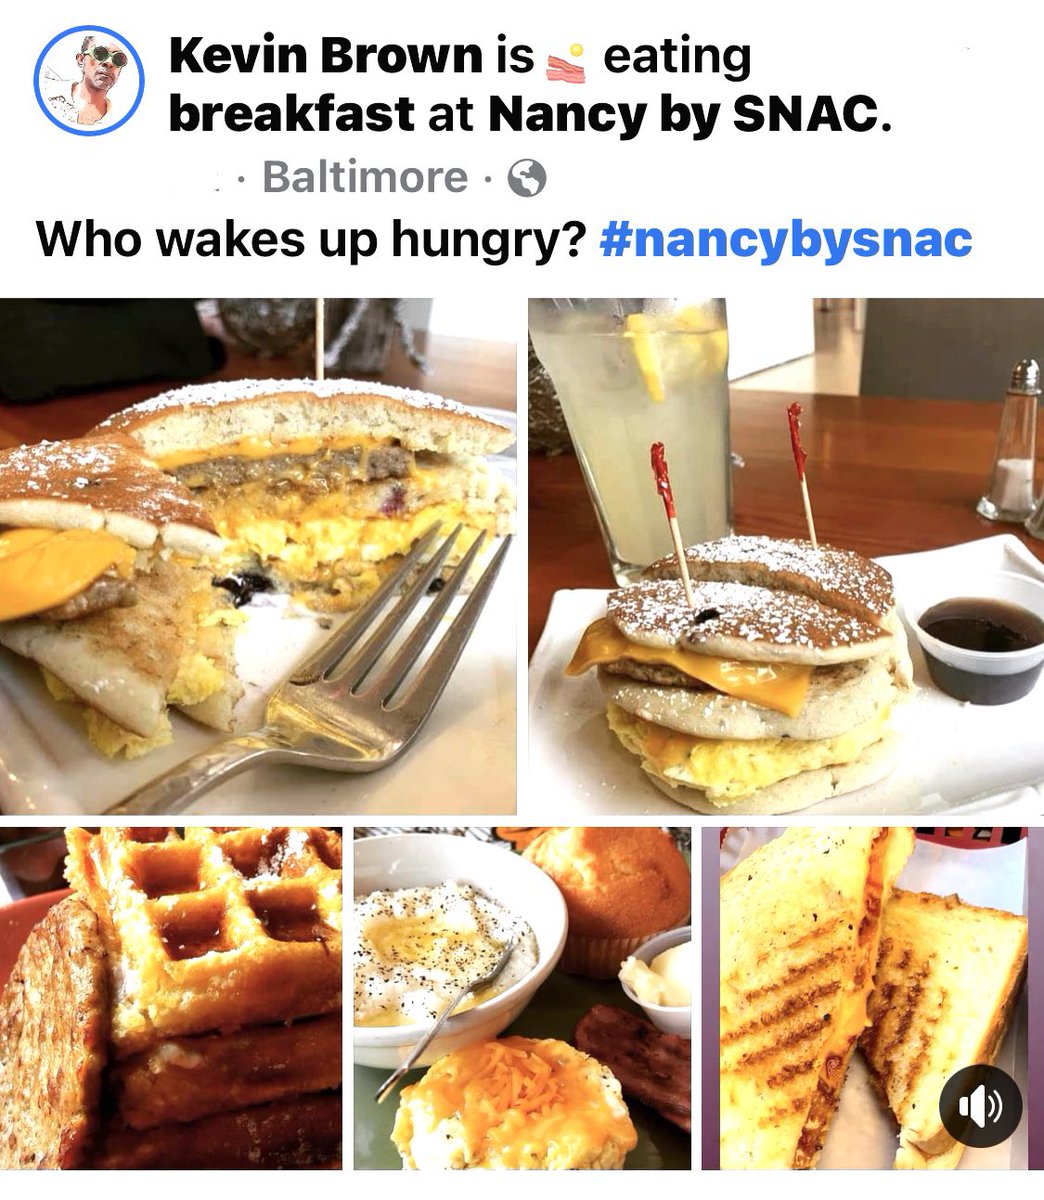 📌
Nancy by SNAC
Station North Arts Cafe Gallery
131 W. North Avenue 
Baltimore, MD 21201
Maryland Institute College of Art
0pen 8:30 til 1:00 every Saturday 
until the end of the year!